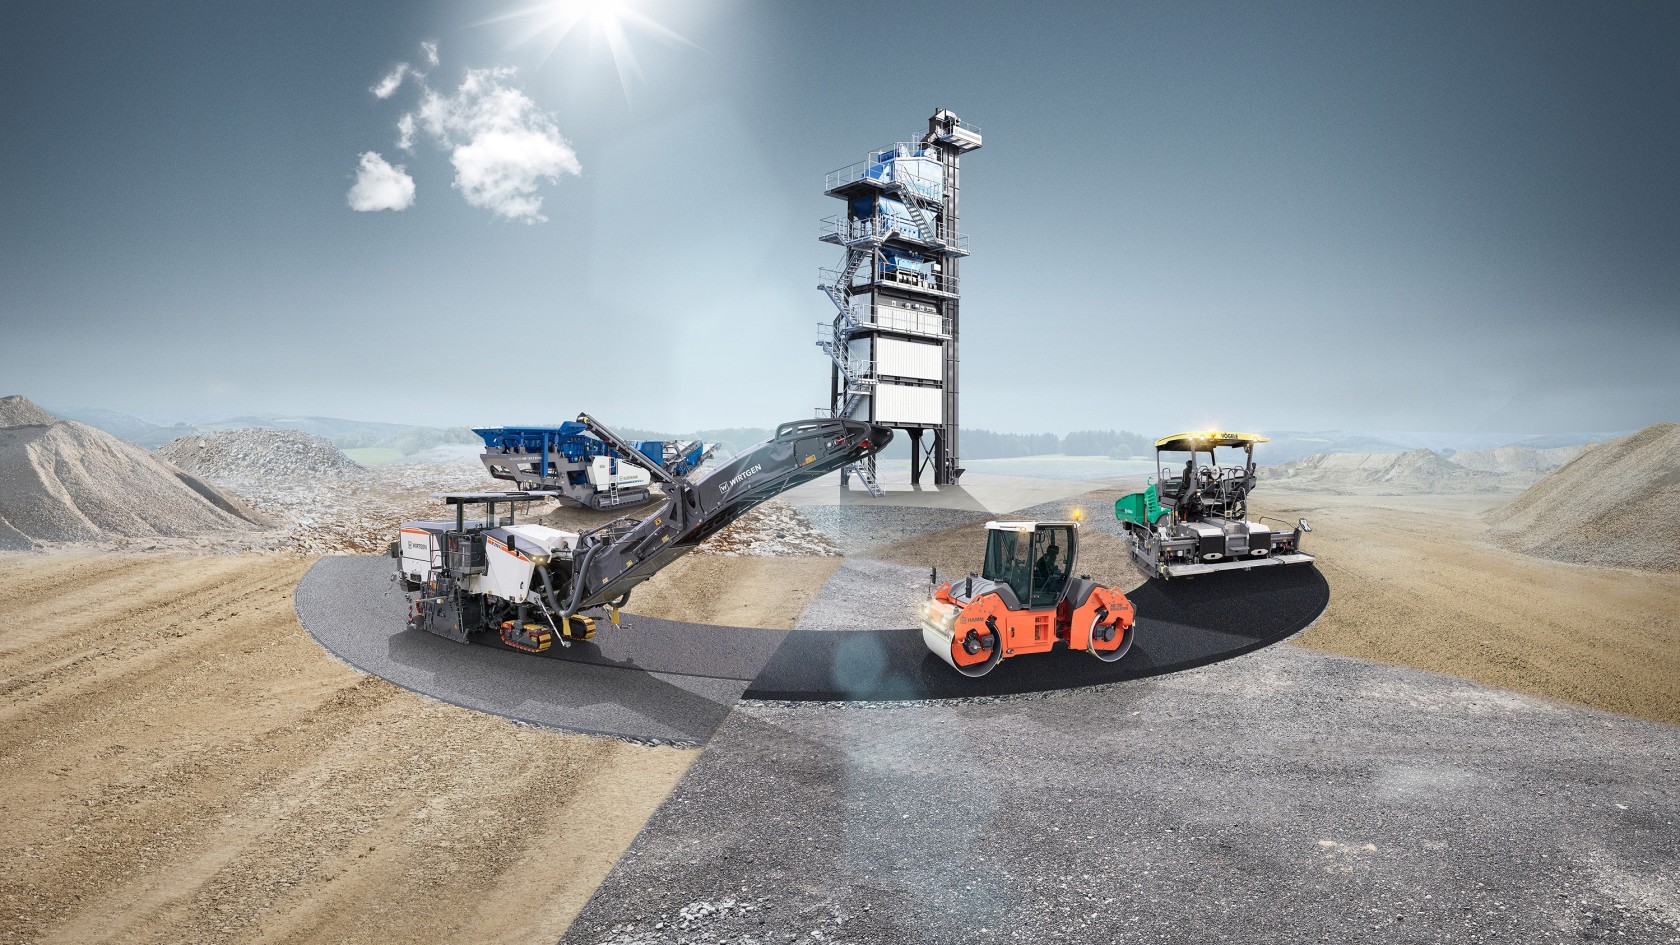 The WIRTGEN GROUP owes its strength to the product brands and their unique experience: WIRTGEN, VÖGELE, HAMM, KLEEMANN and BENNINGHOVEN.